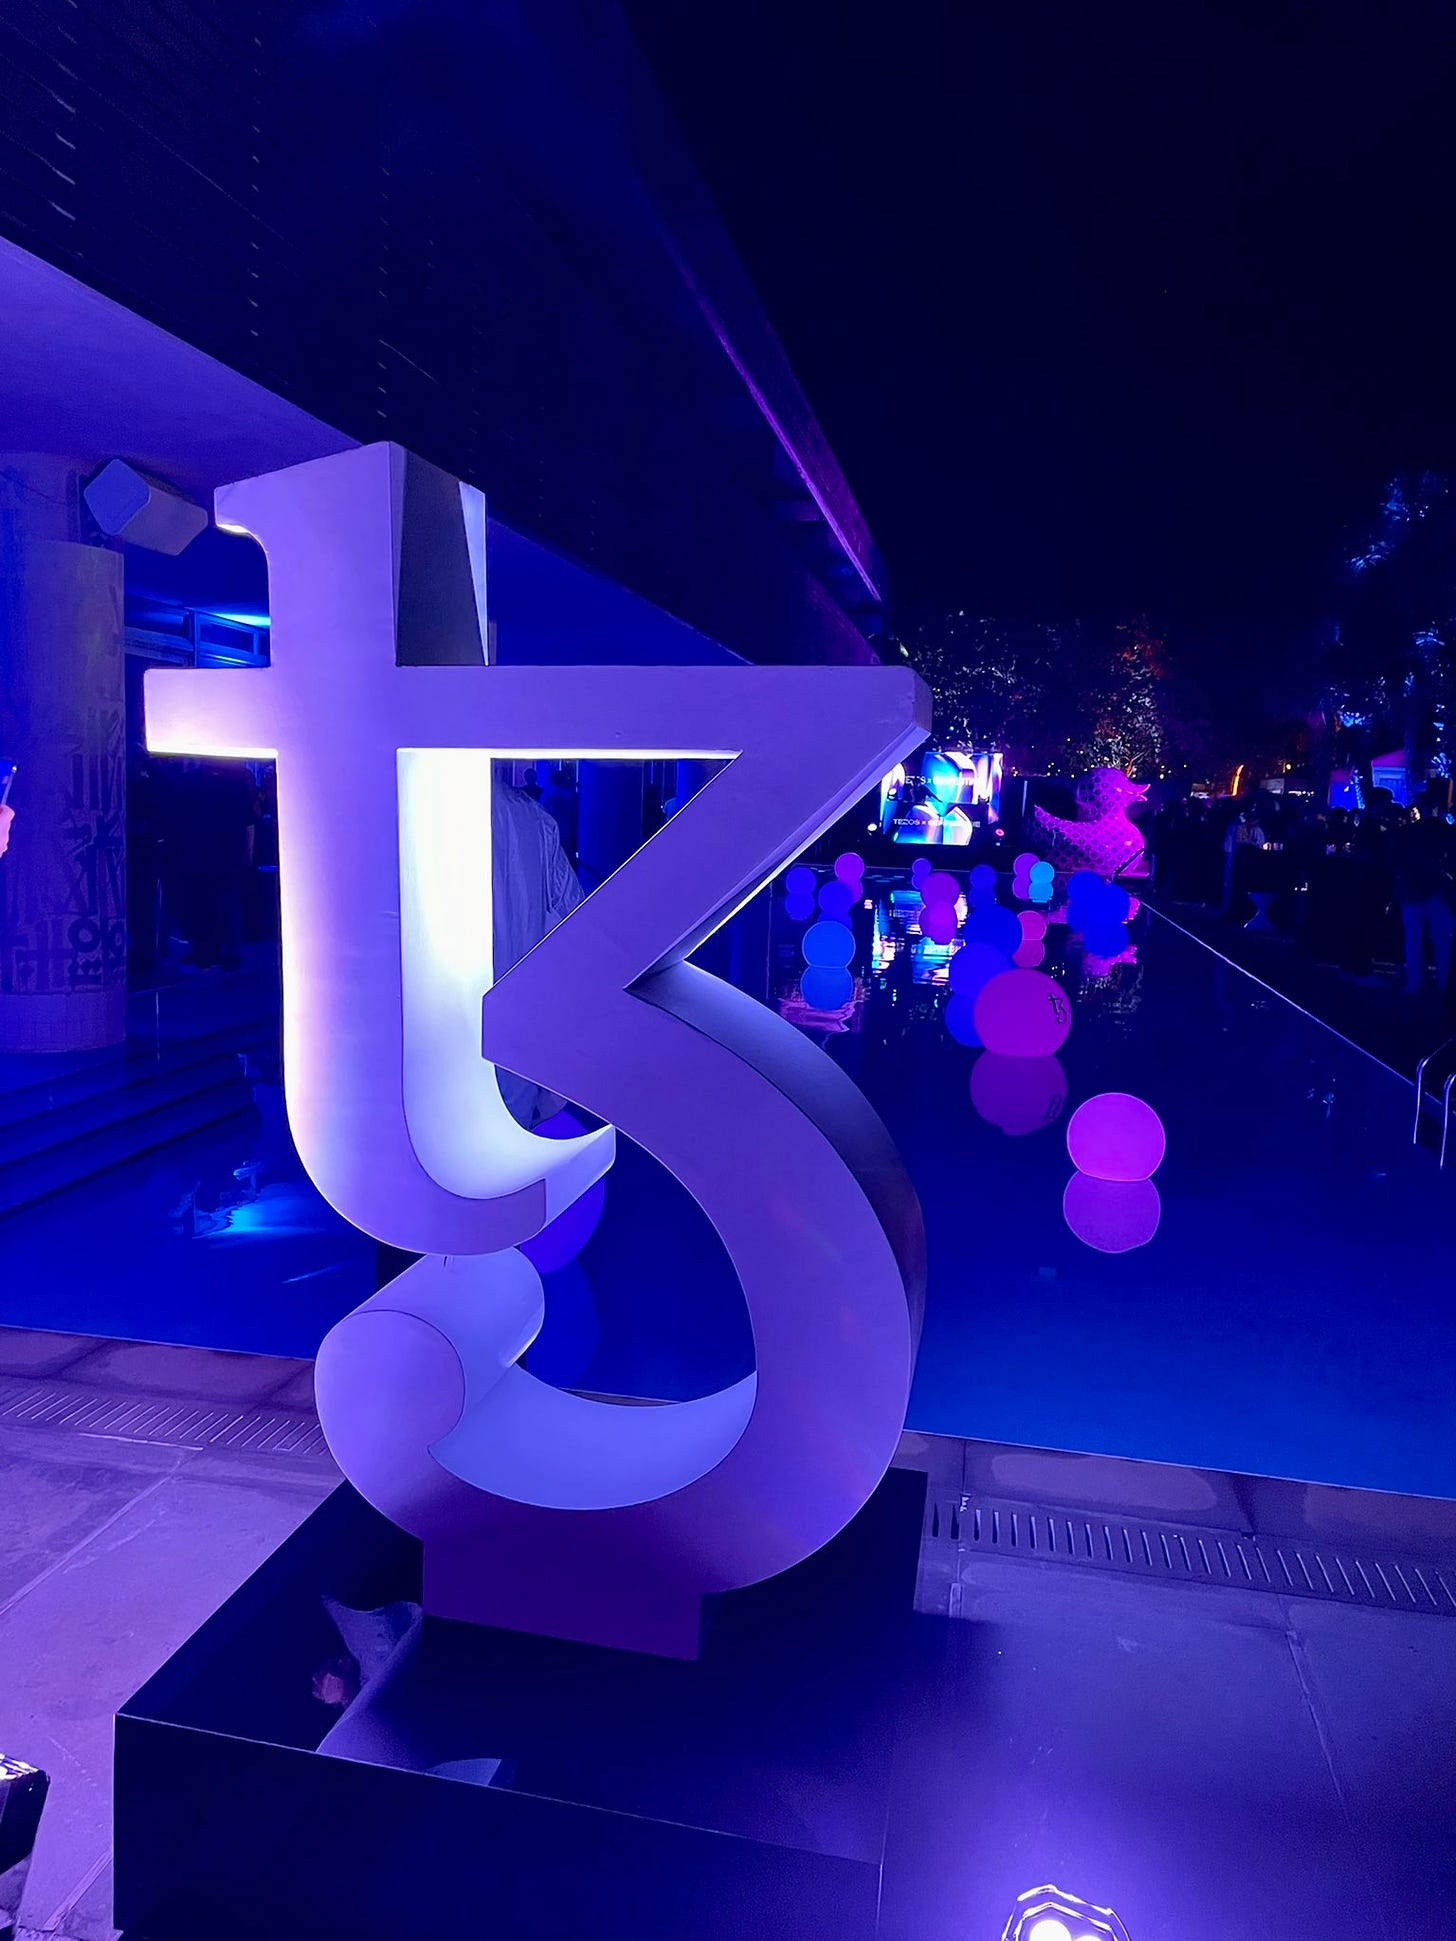 Tezos + Serpentine threw a welcoming pool party.